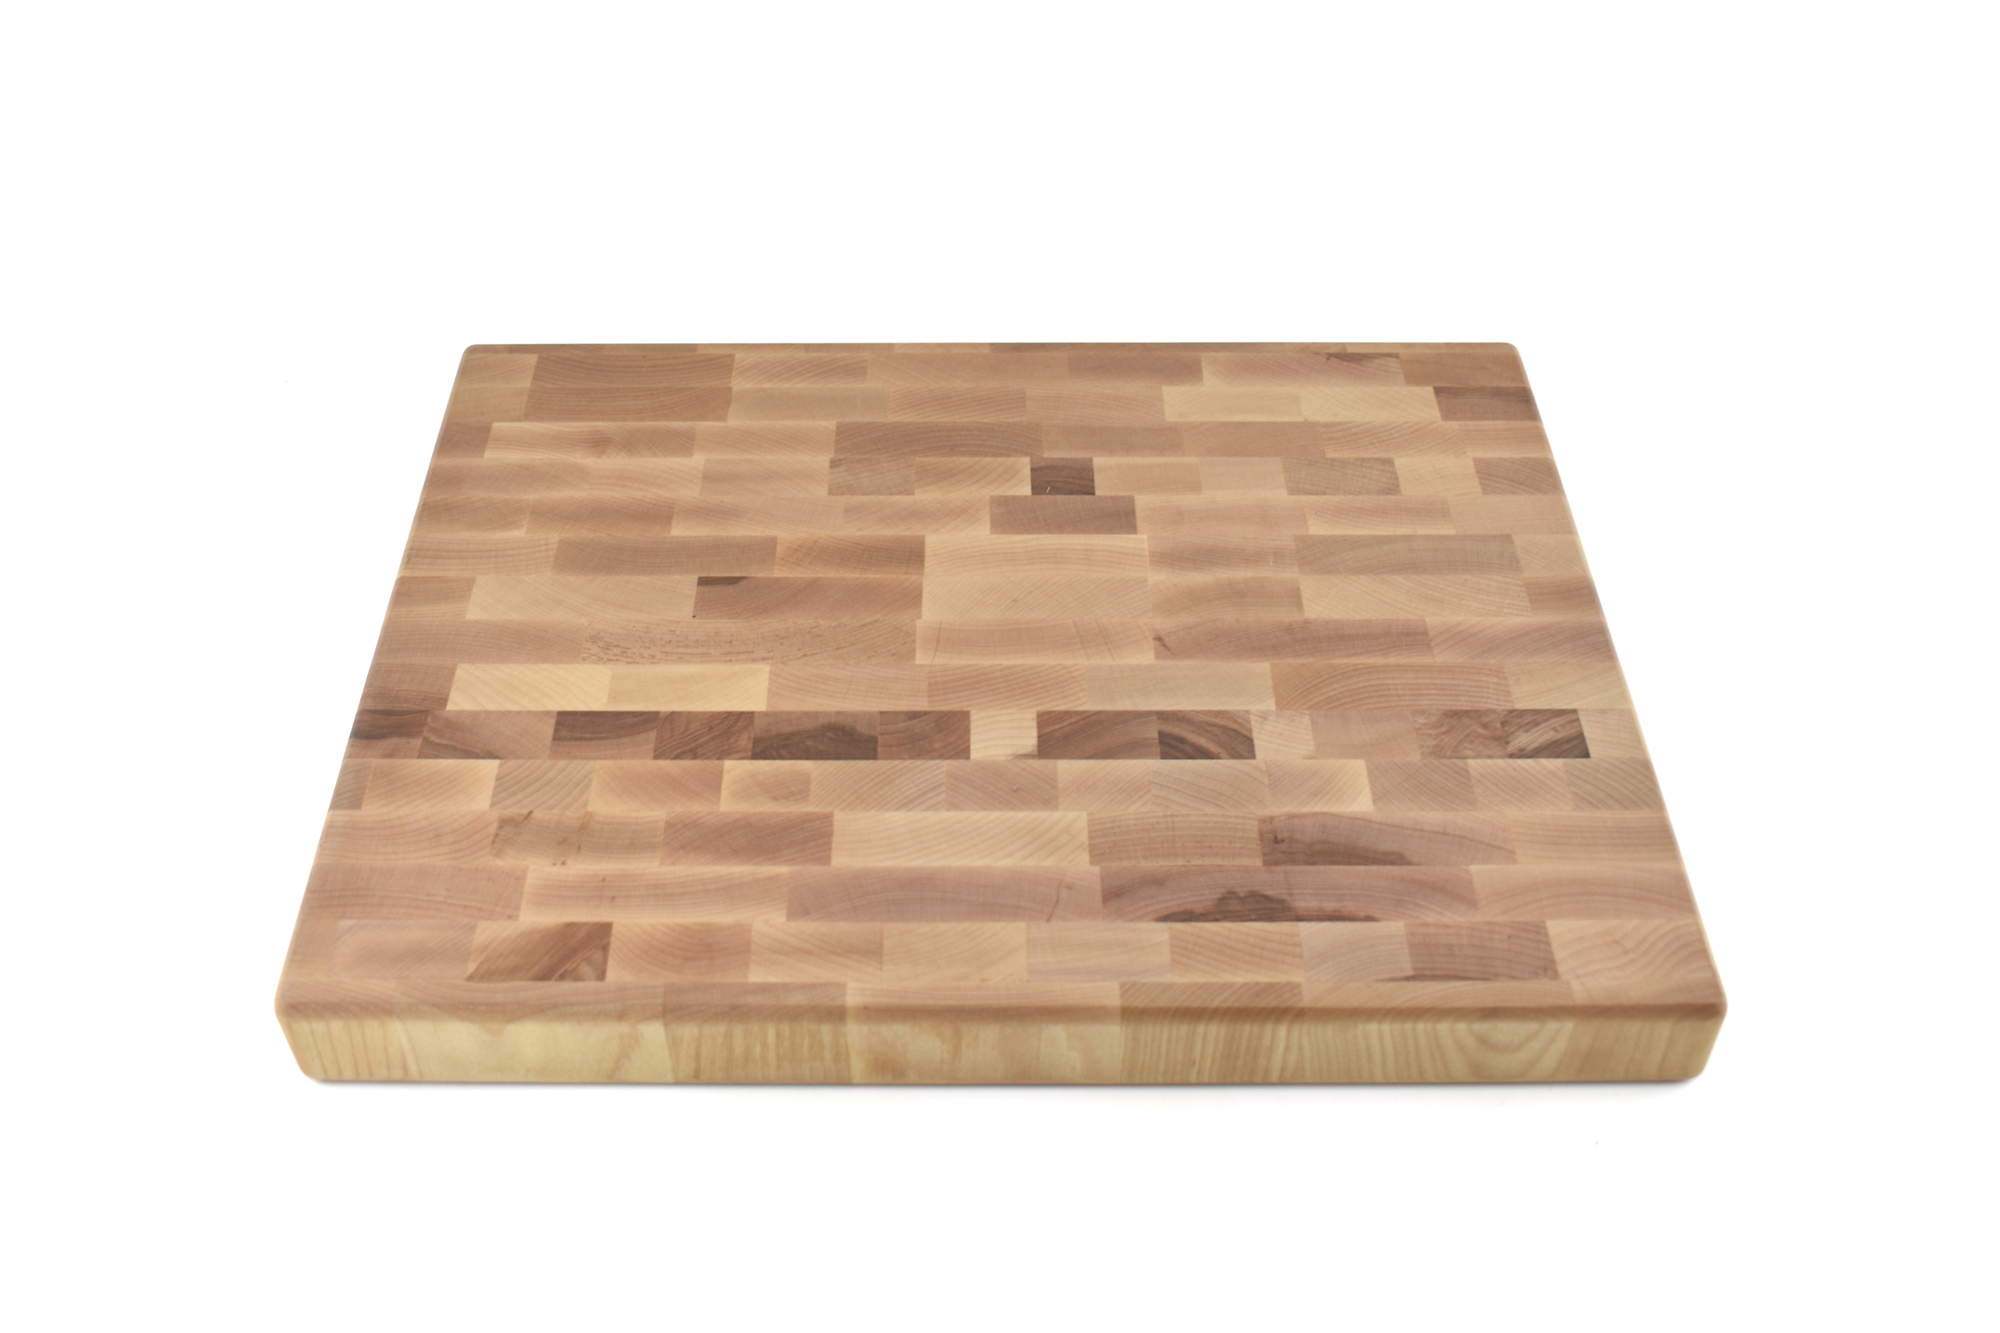 Medium Maple End grain butcher block with side handle indents 